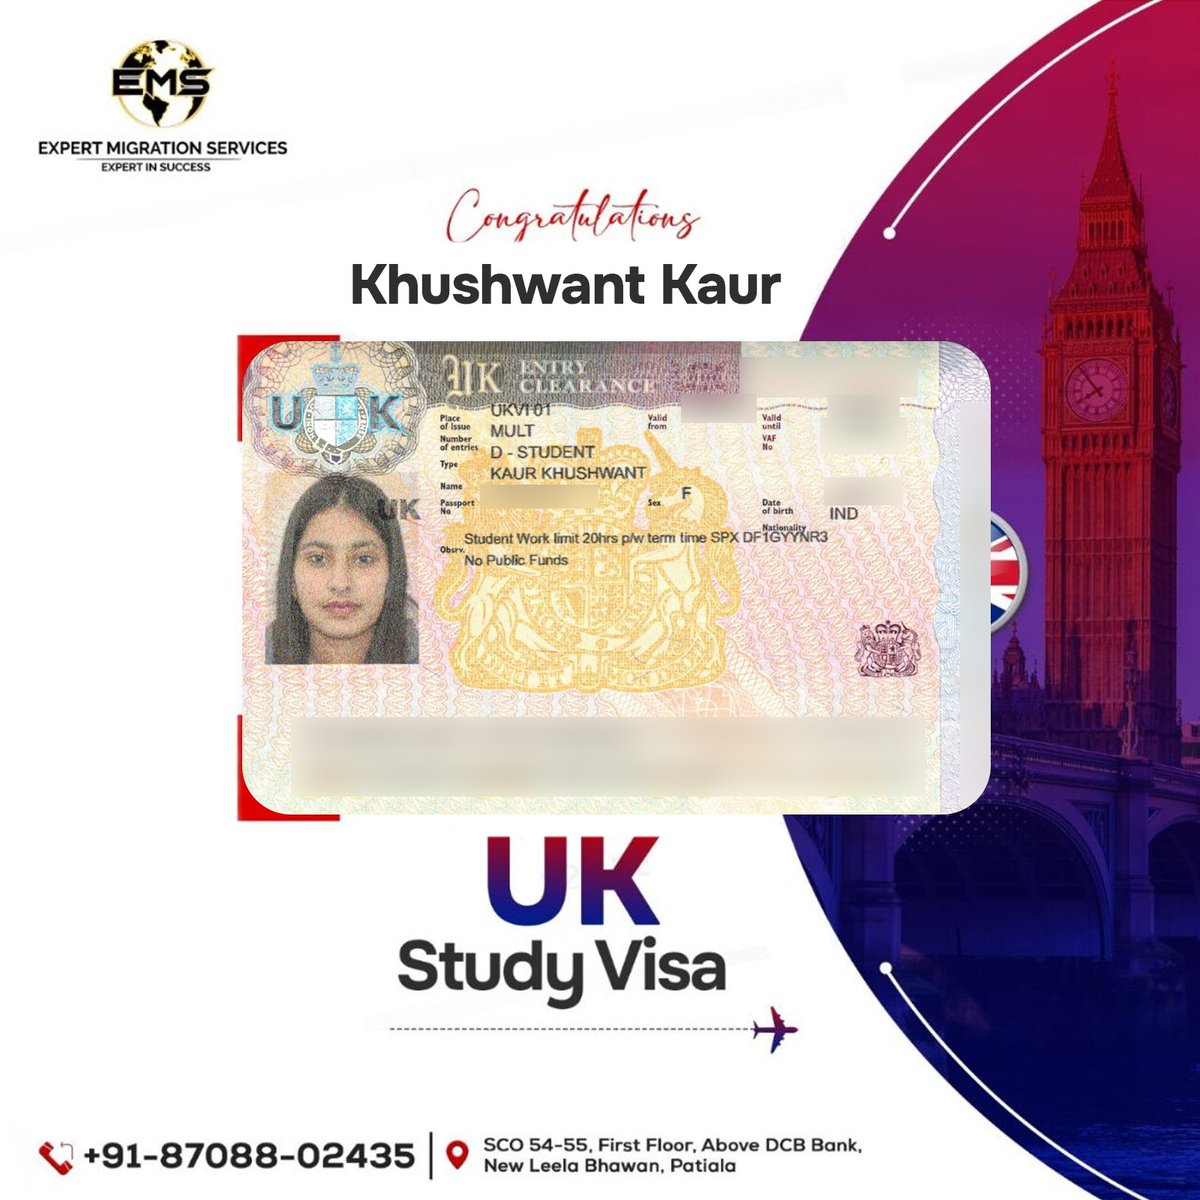 📷 Celebrating Khushwant Kaur's success in obtaining her UK Study Visa with our expert team's guidance! 📷 Here's to a bright future filled with academic achievements and personal growth. 📷

.
.
.
#ExpertMigrationServices #StudyinUK #SettleInUK #ImmigrationConsultant